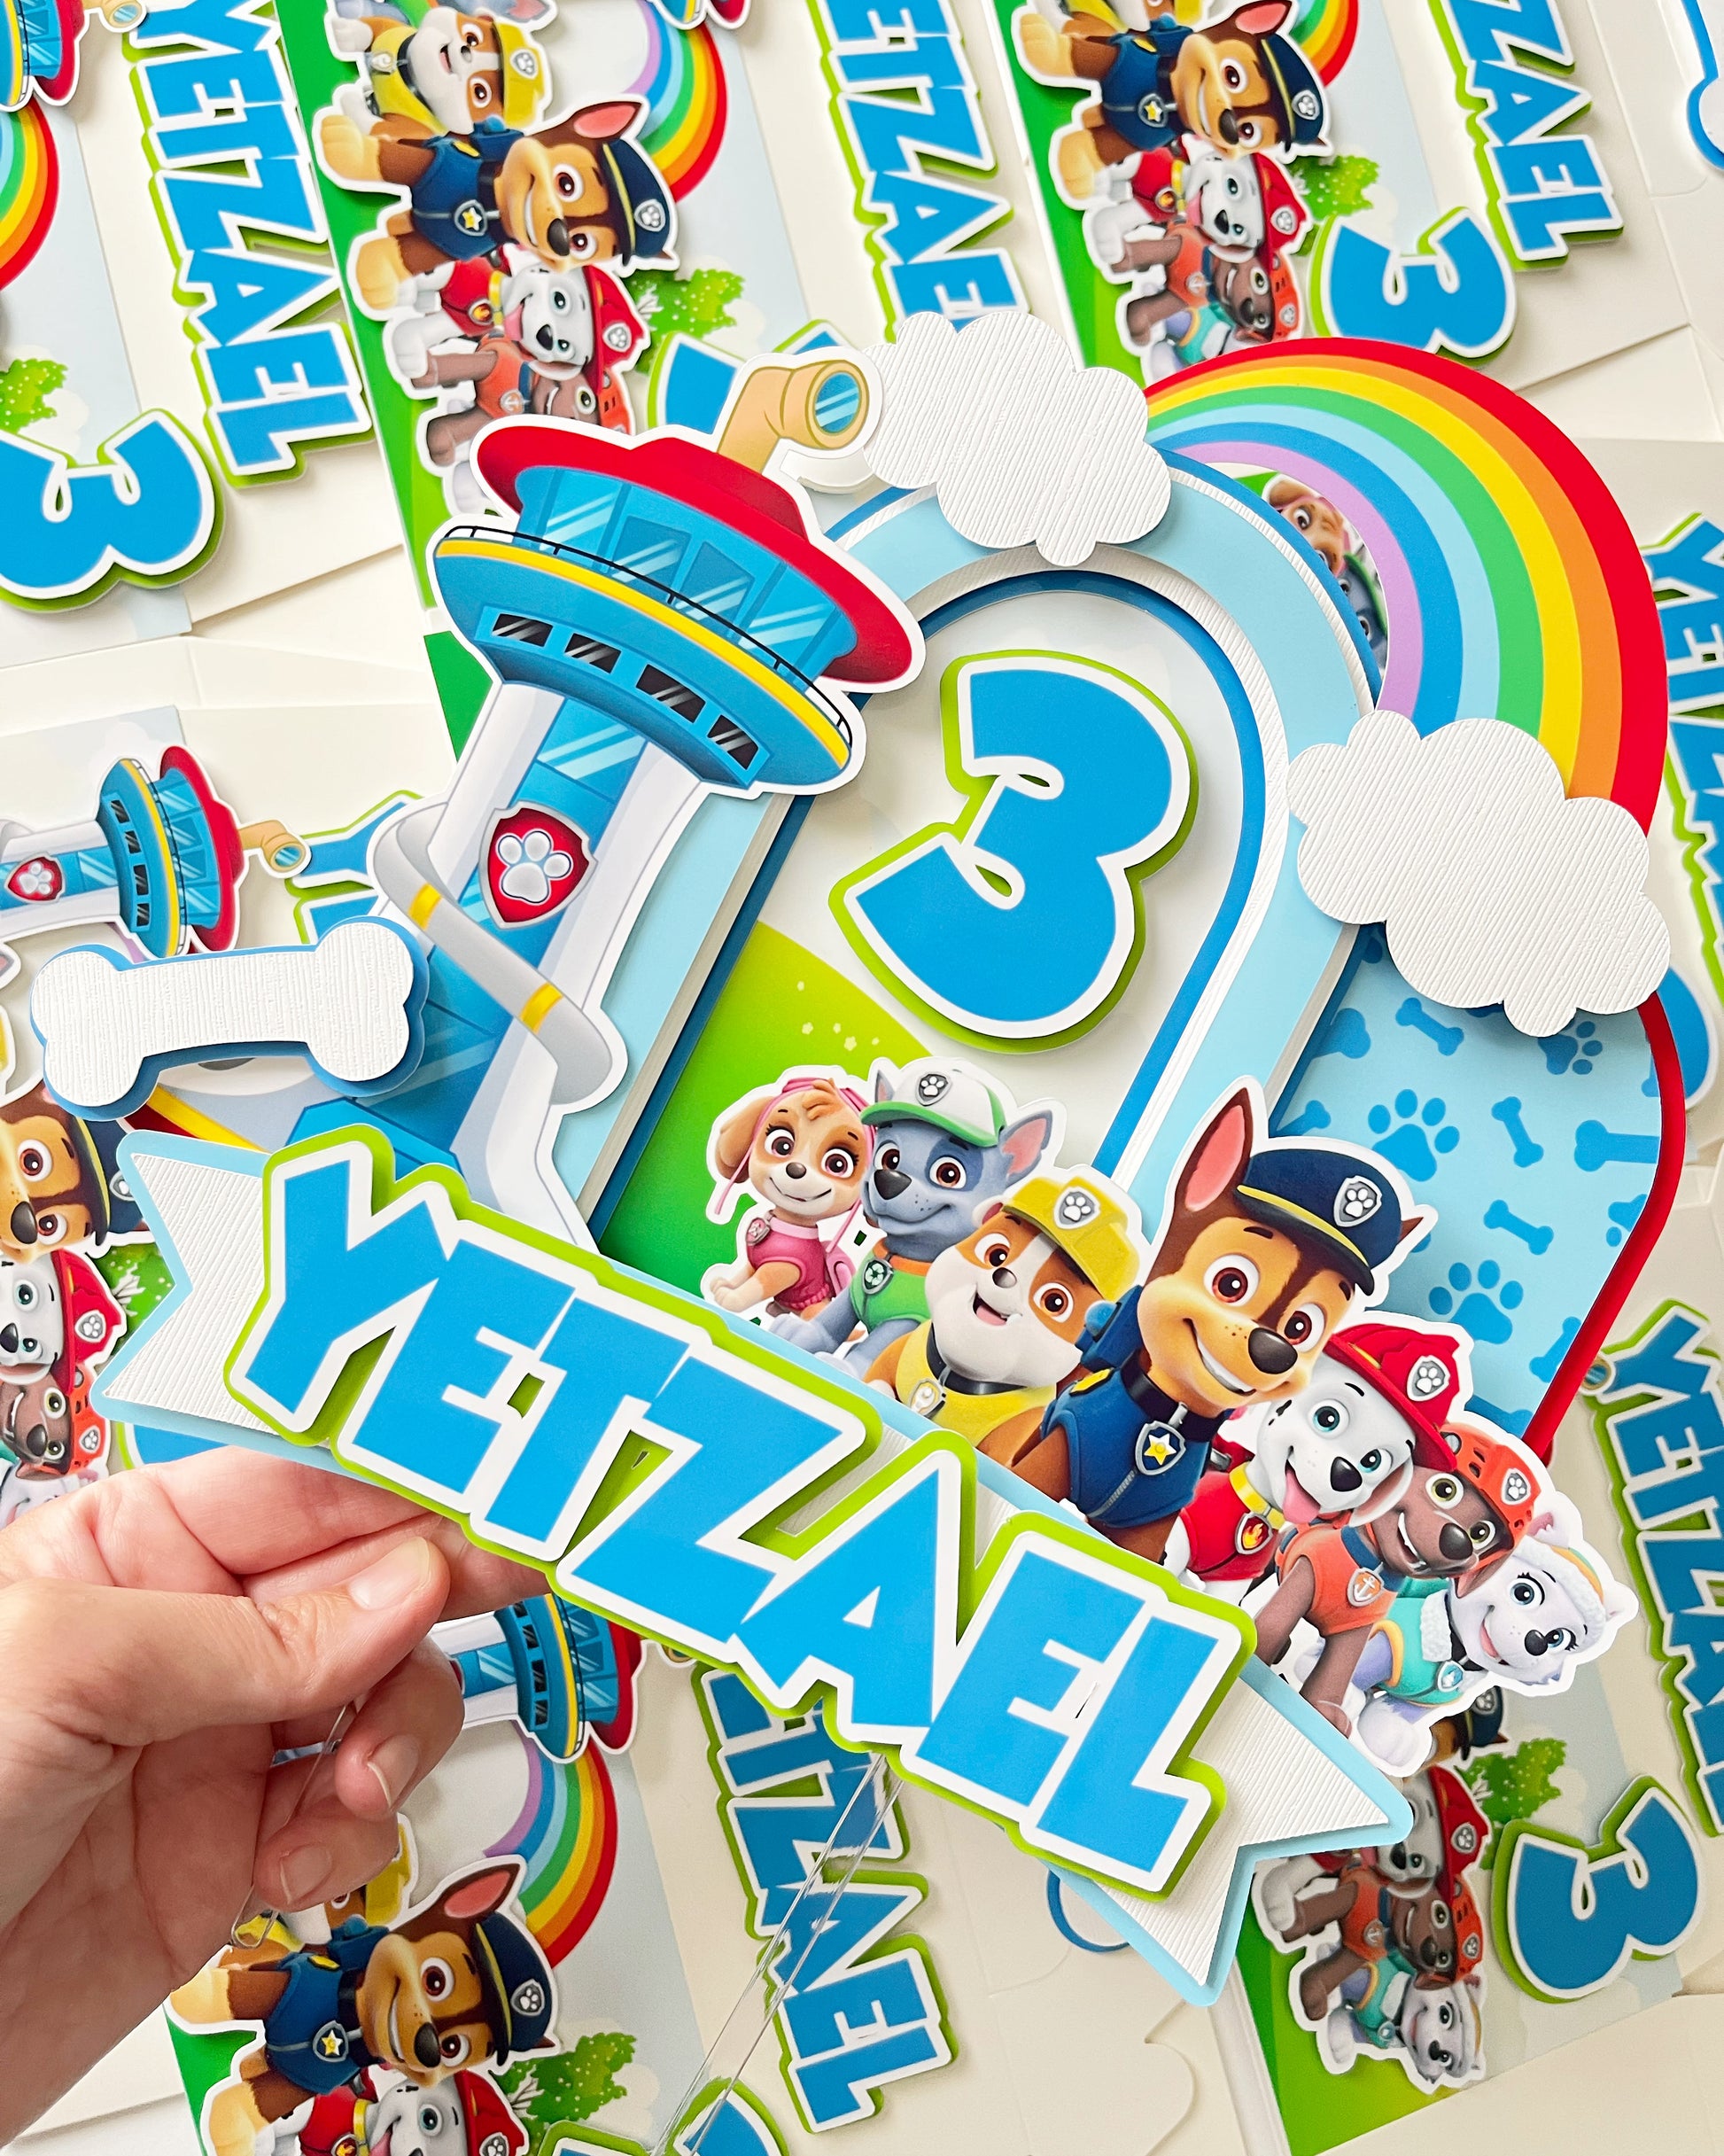 paw patrol 3  Paw patrol birthday, Paw patrol birthday party, Paw patrol  decorations